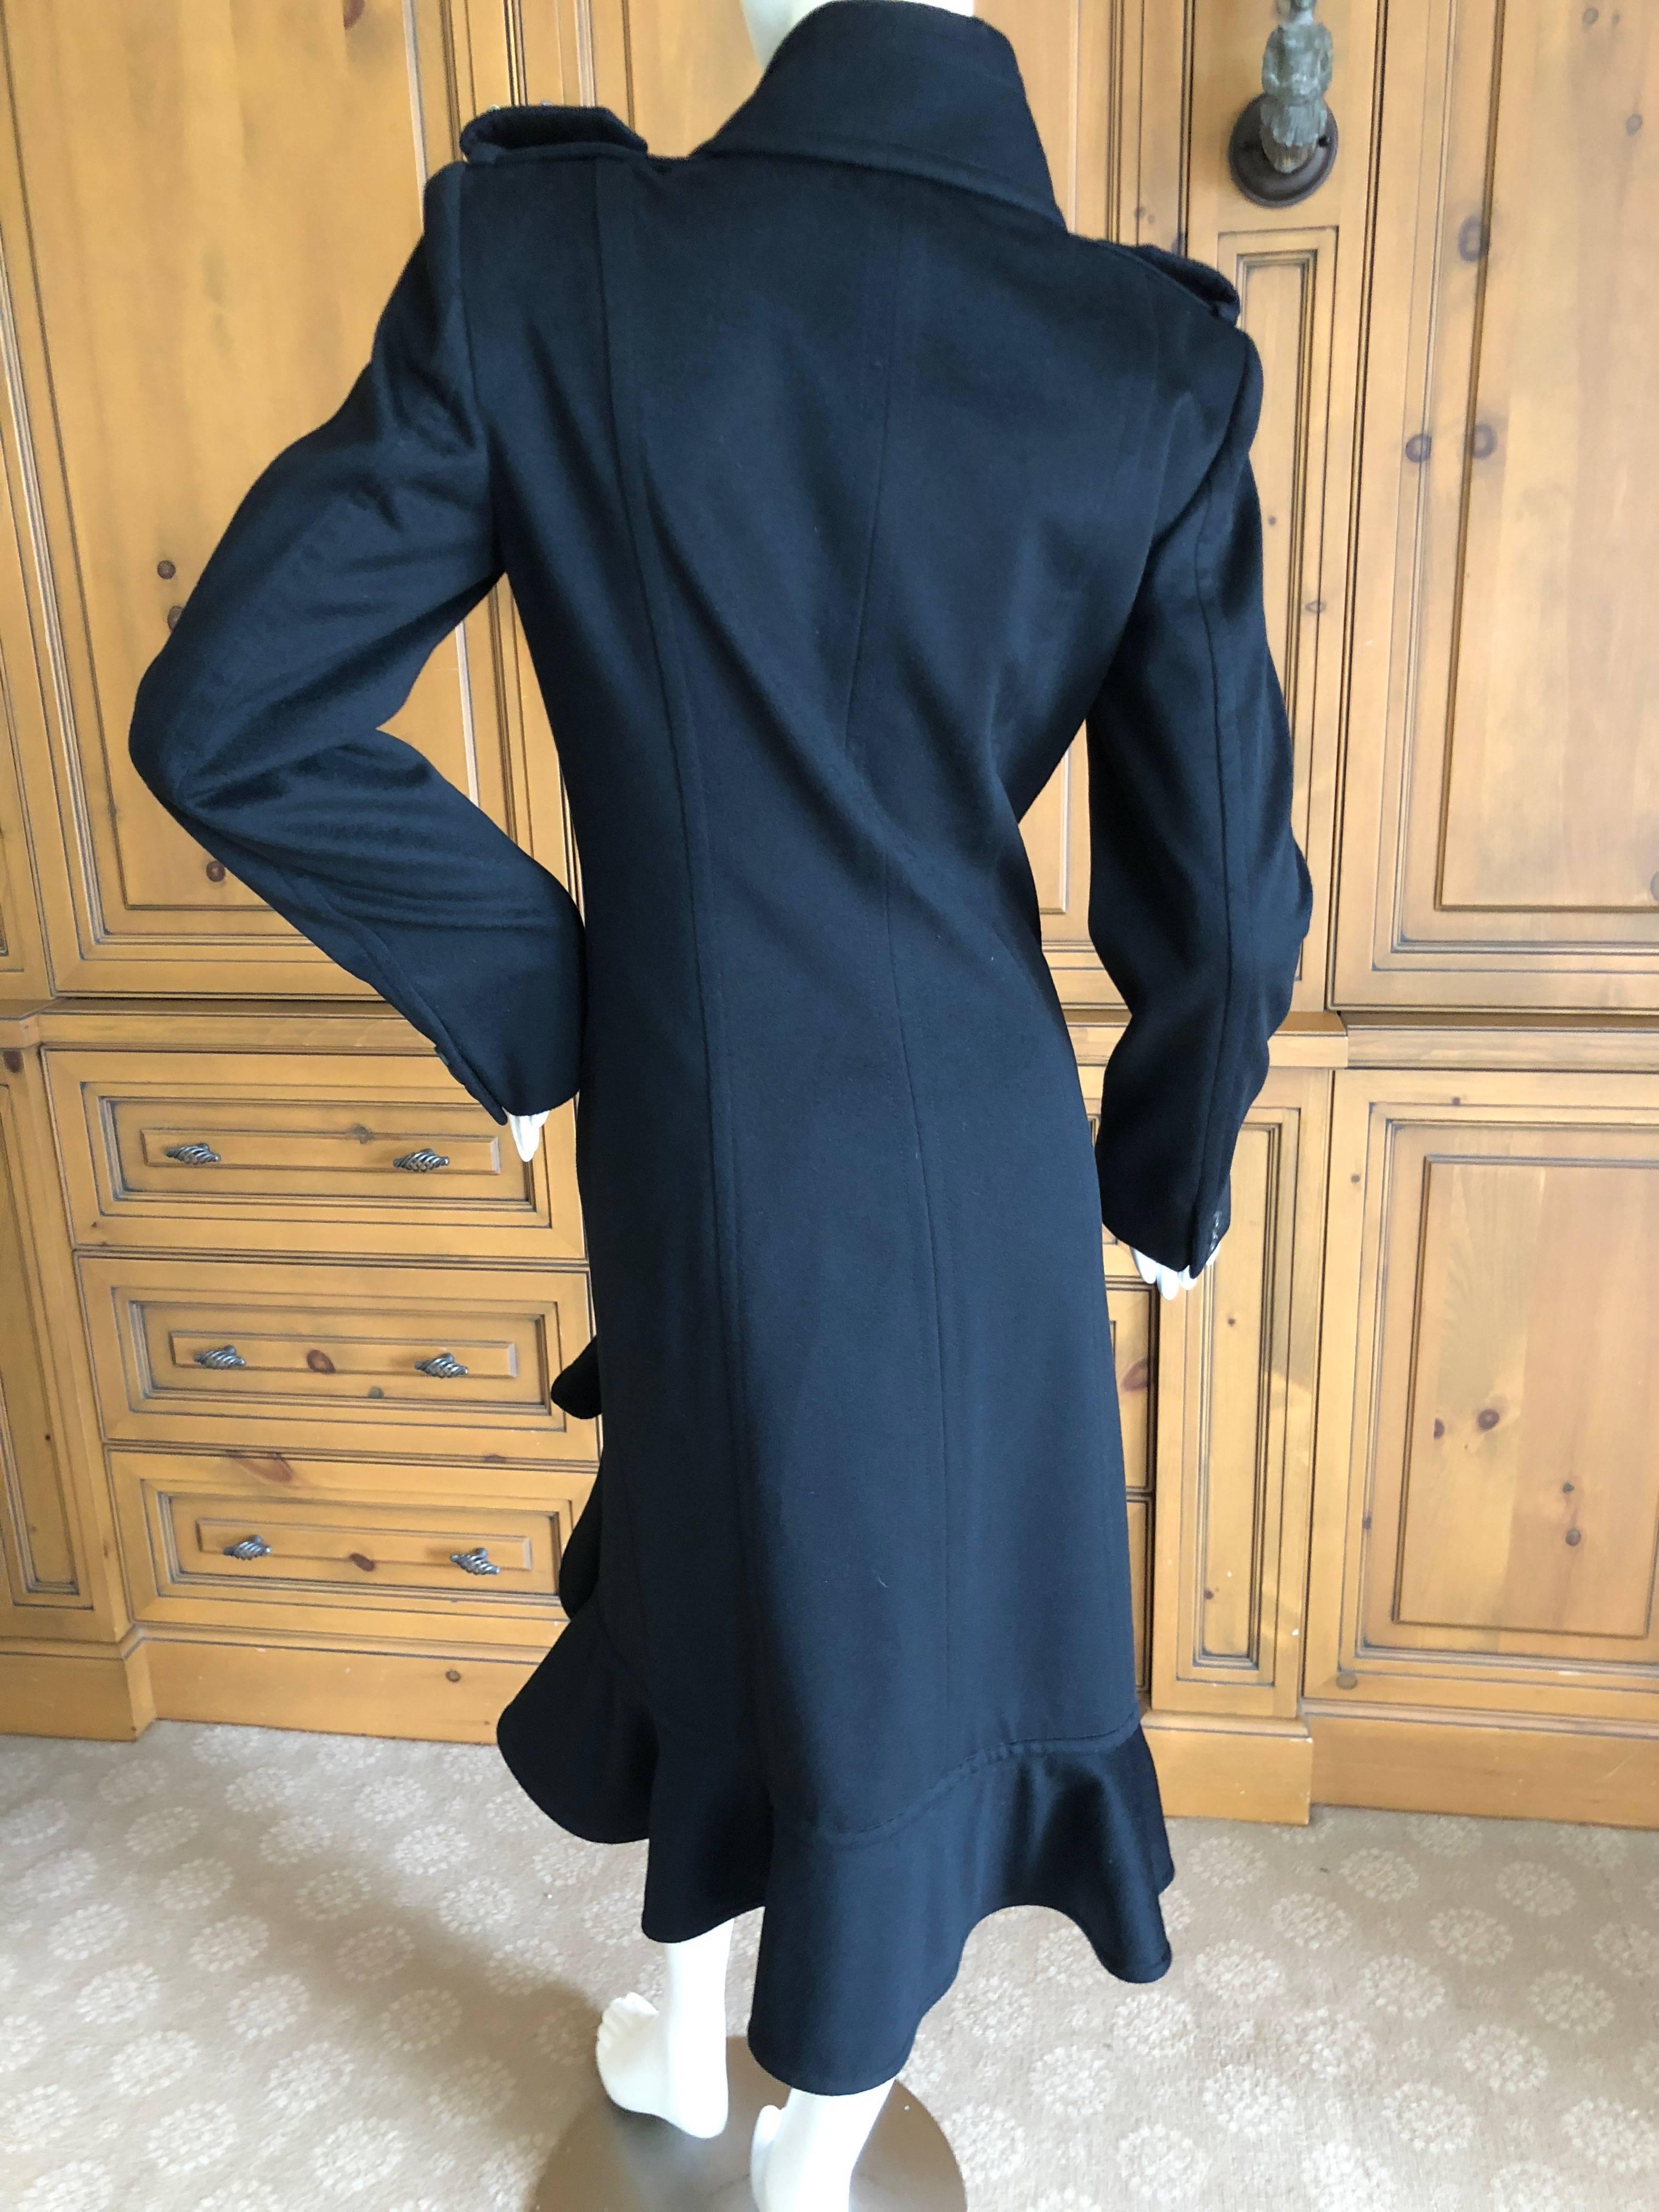 Yves Saint Laurent by Tom Ford Black Wool Ruffle Front Coat from Fall 2004 For Sale 2